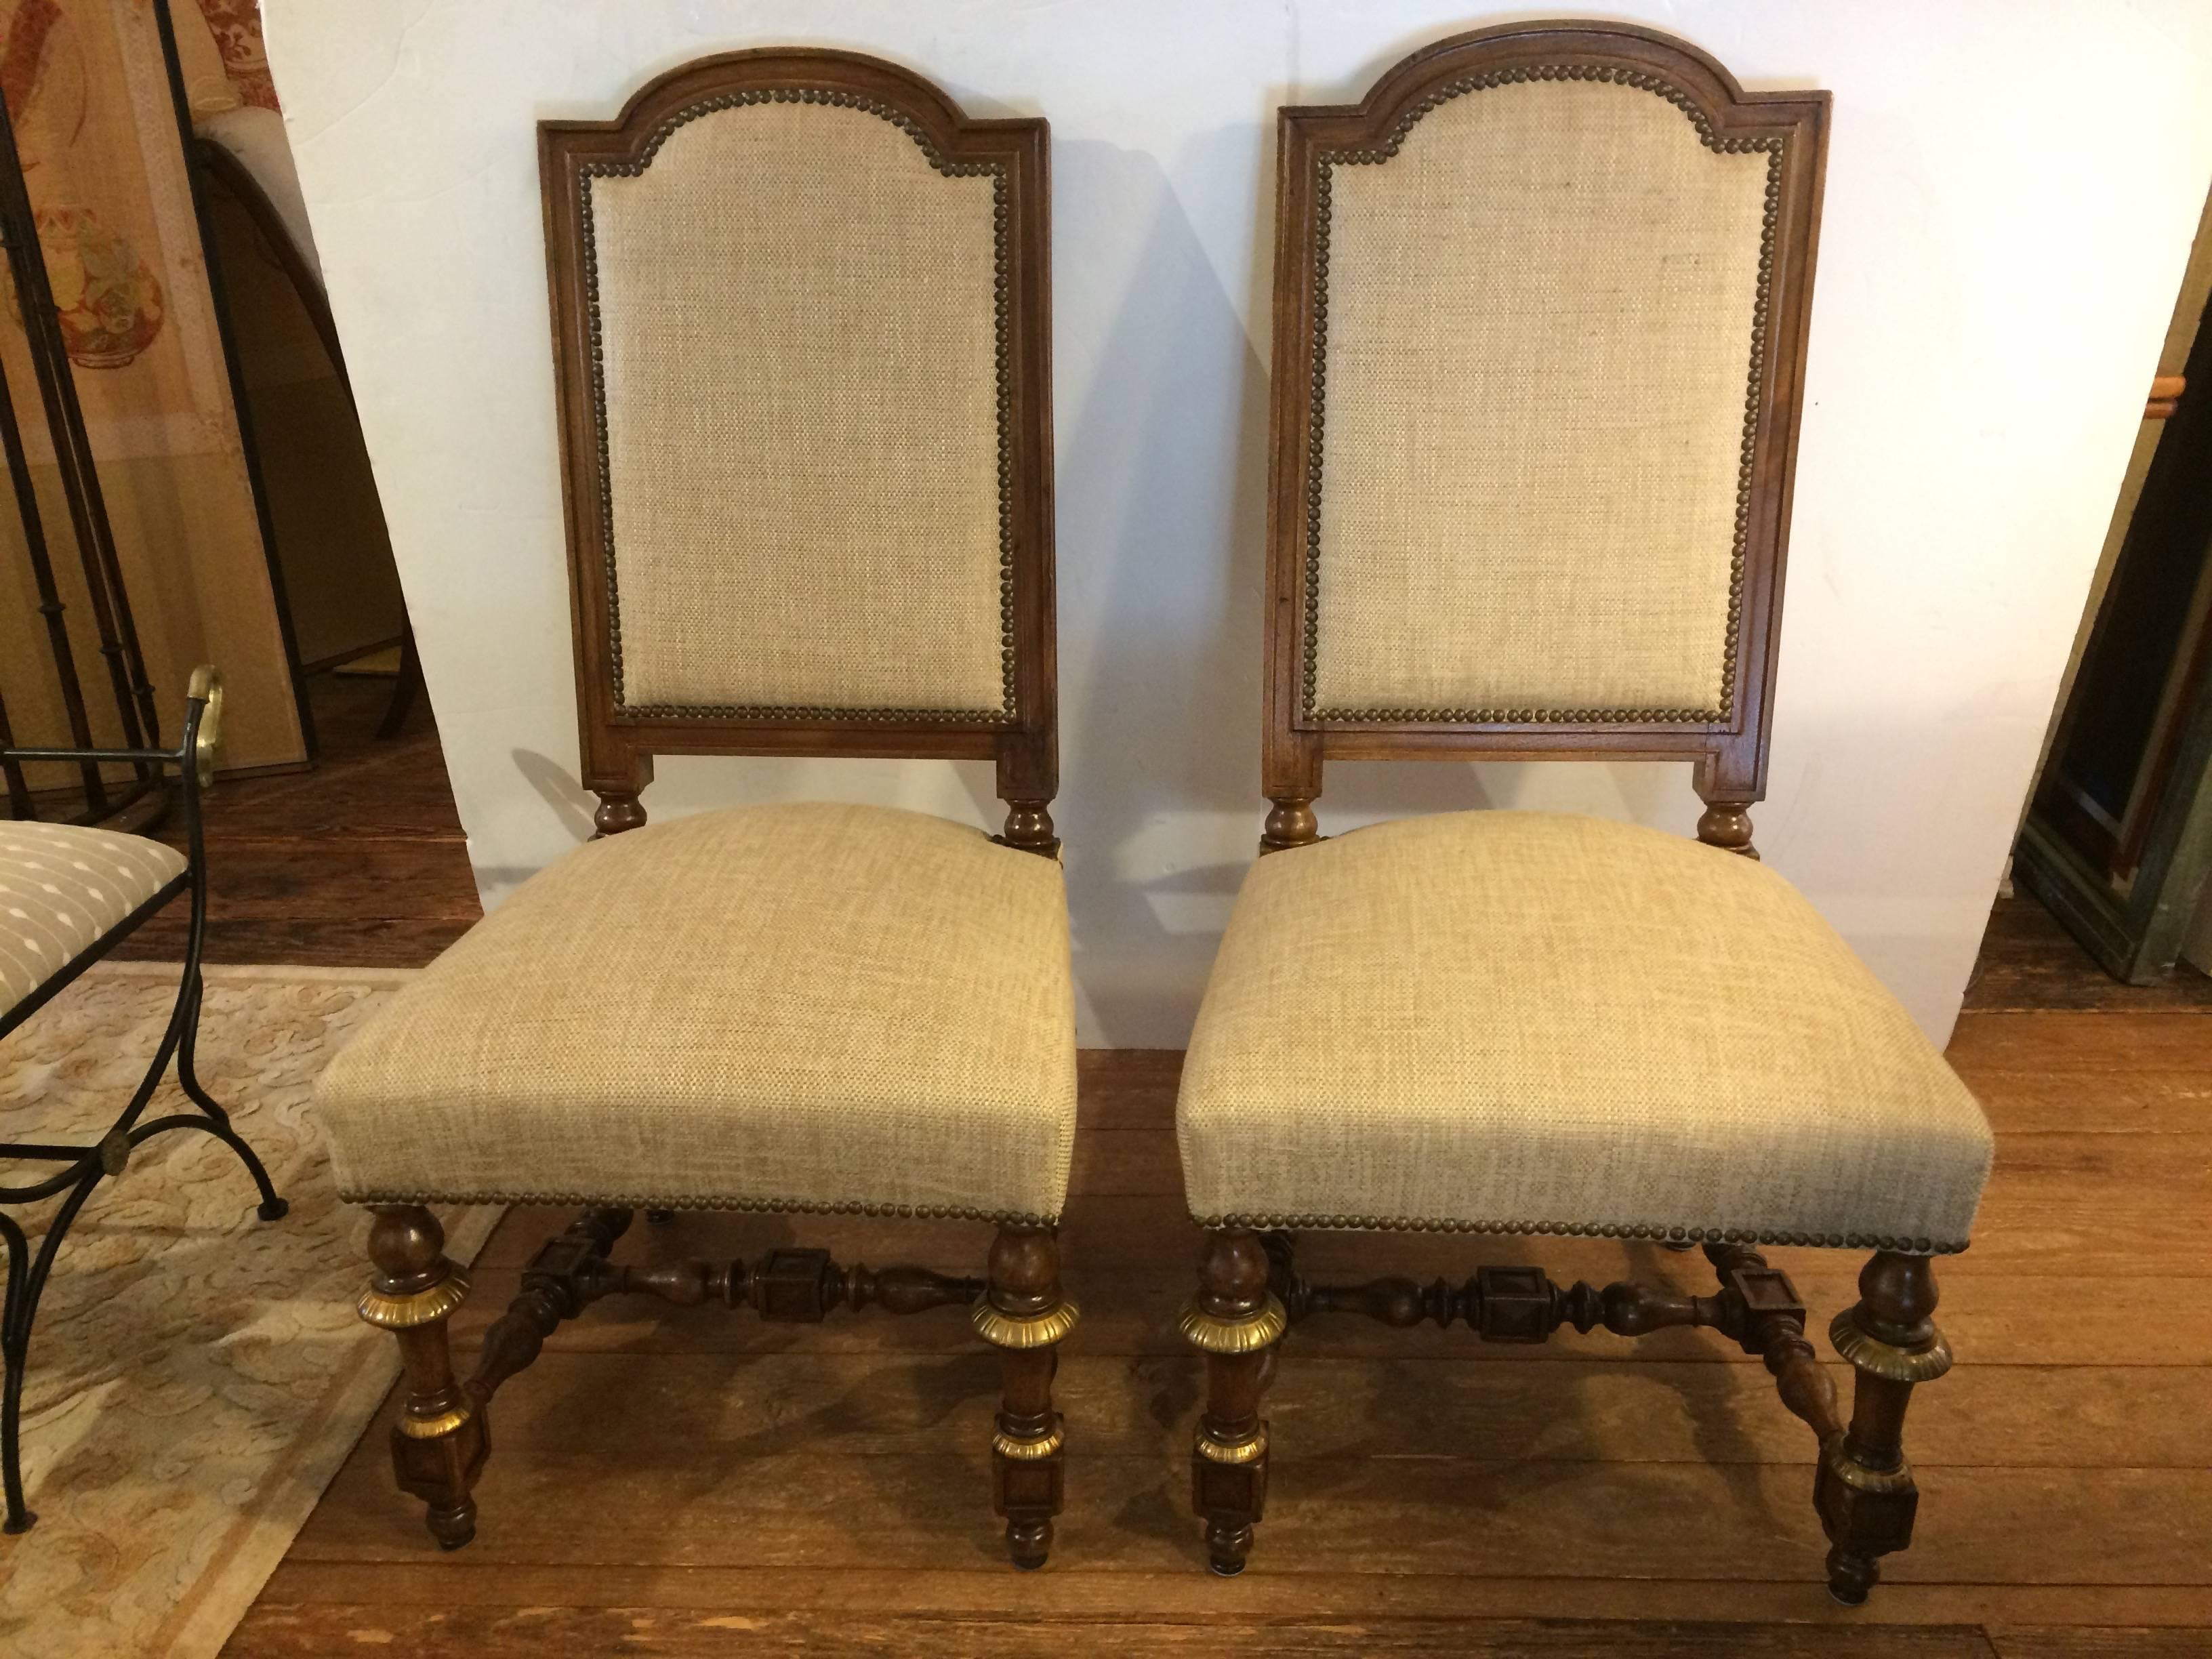 Set of 8 early French walnut/bronze ornamented chairs from St. Remy in Provence. Sturdy and comfortable with neutral Lee Jofa heavy linen fabric.  Very impressive in scale and were just tightened and waxed to bring to their full richness.

 seat